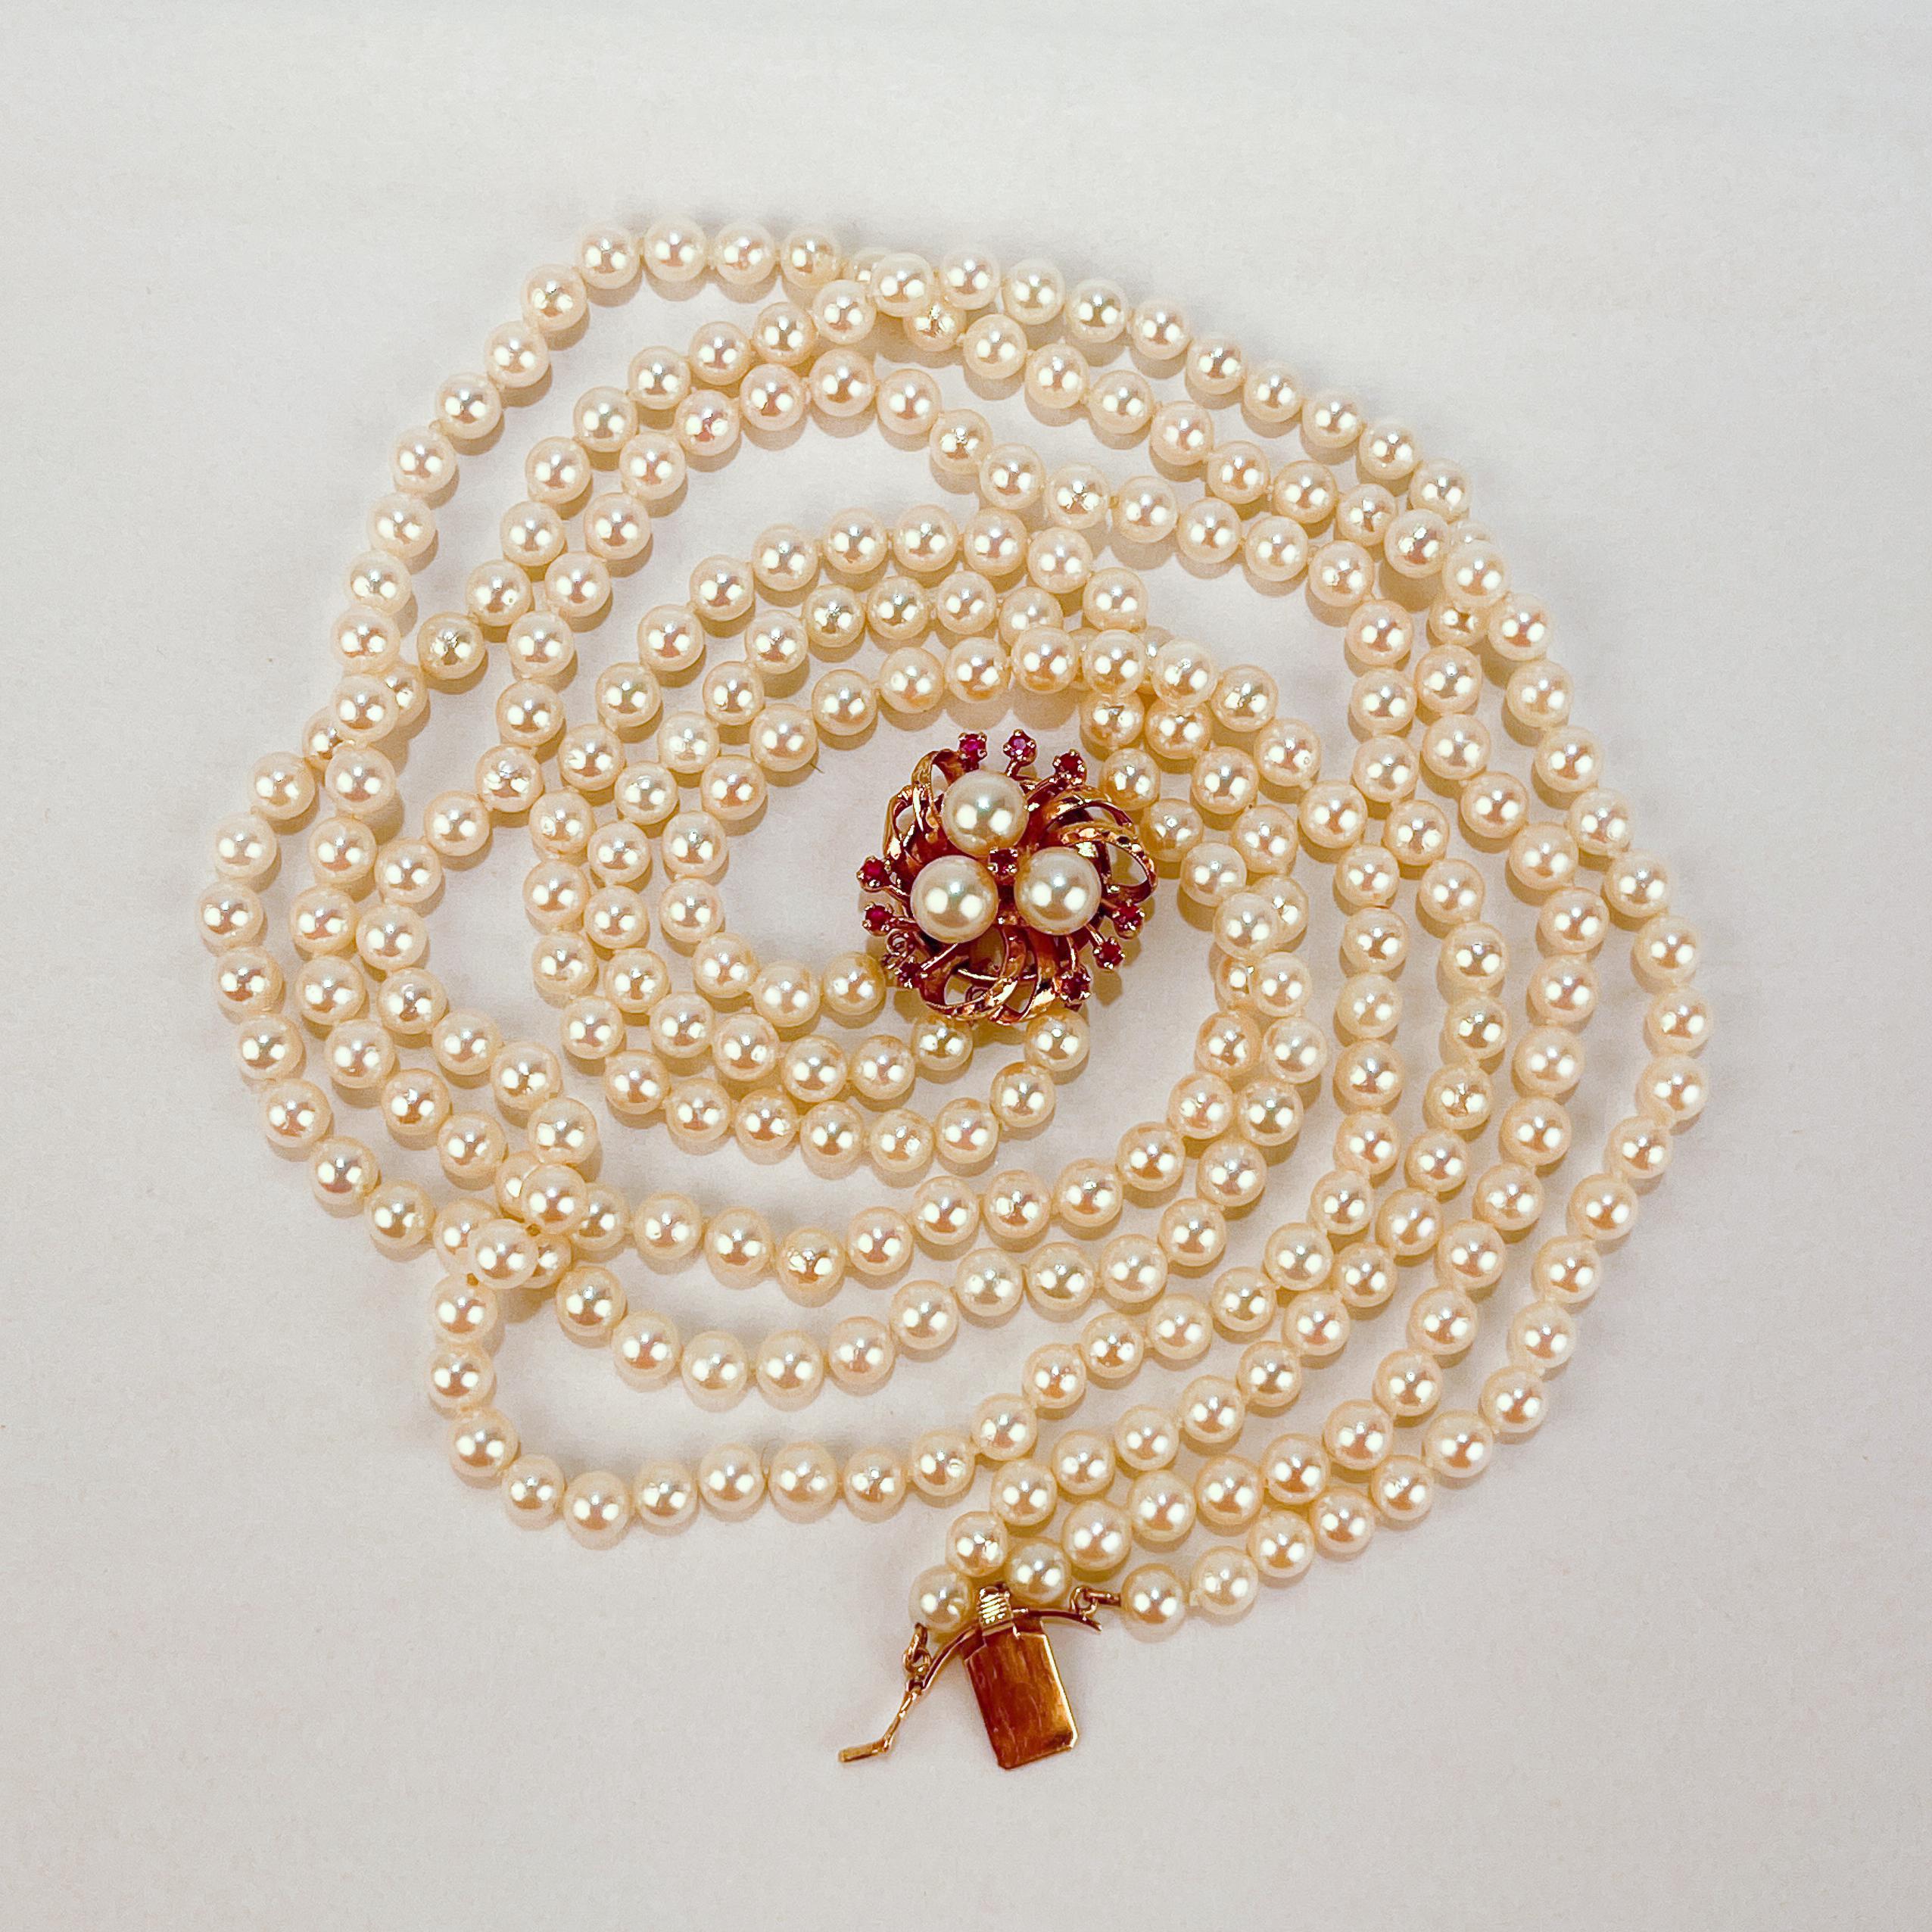 A very fine 3-Strand Akoya pearl necklace.

With a decorative 14k gold flower box clasp with prong set rubies that link the three strands of hand-knotted round white pearls on silk cord.

Created by Tasaki - one of Mikimoto's principal